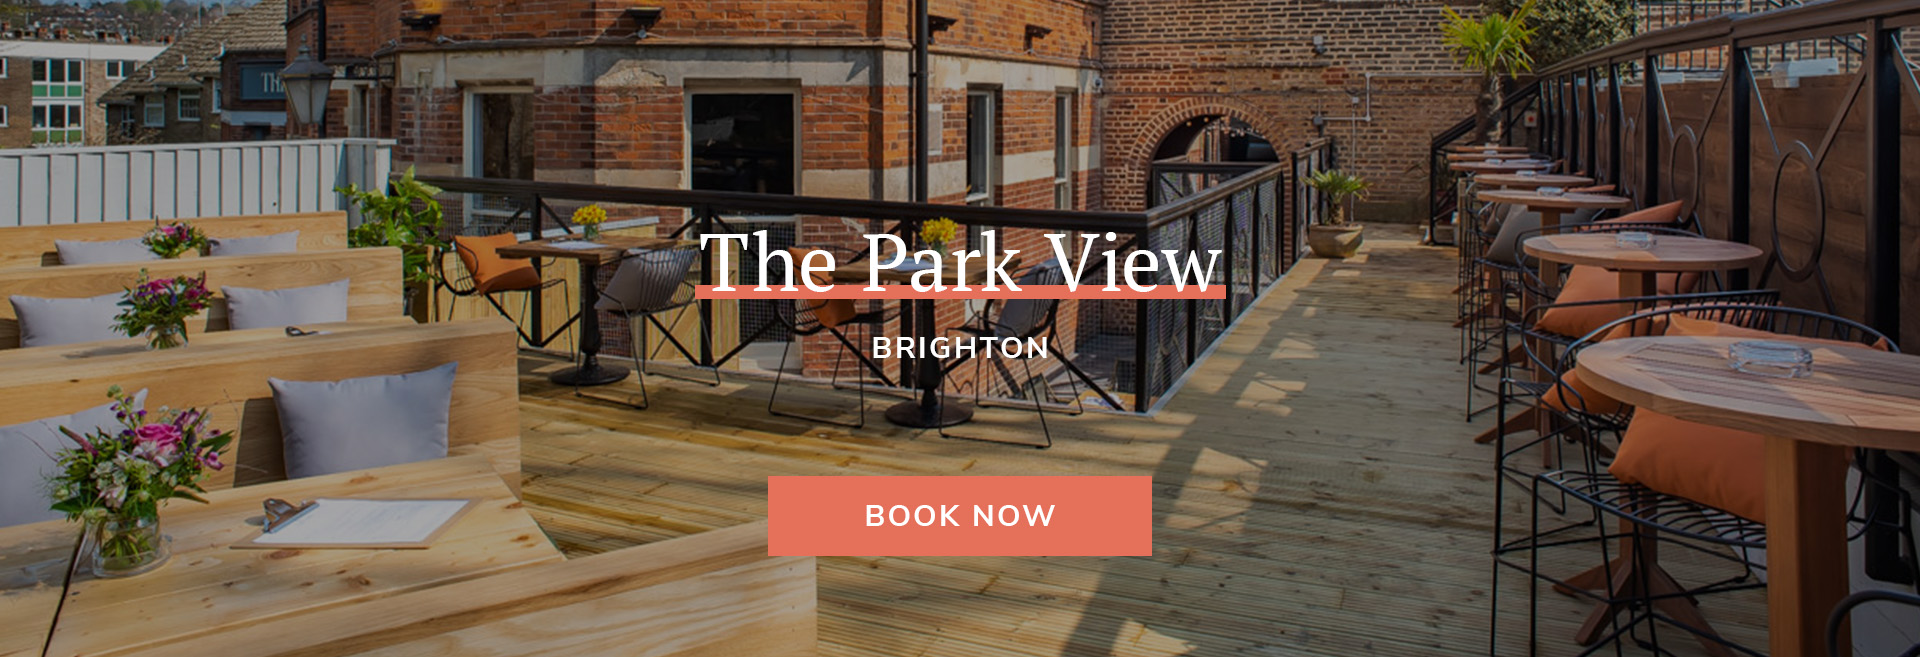 The Park View Banner 3